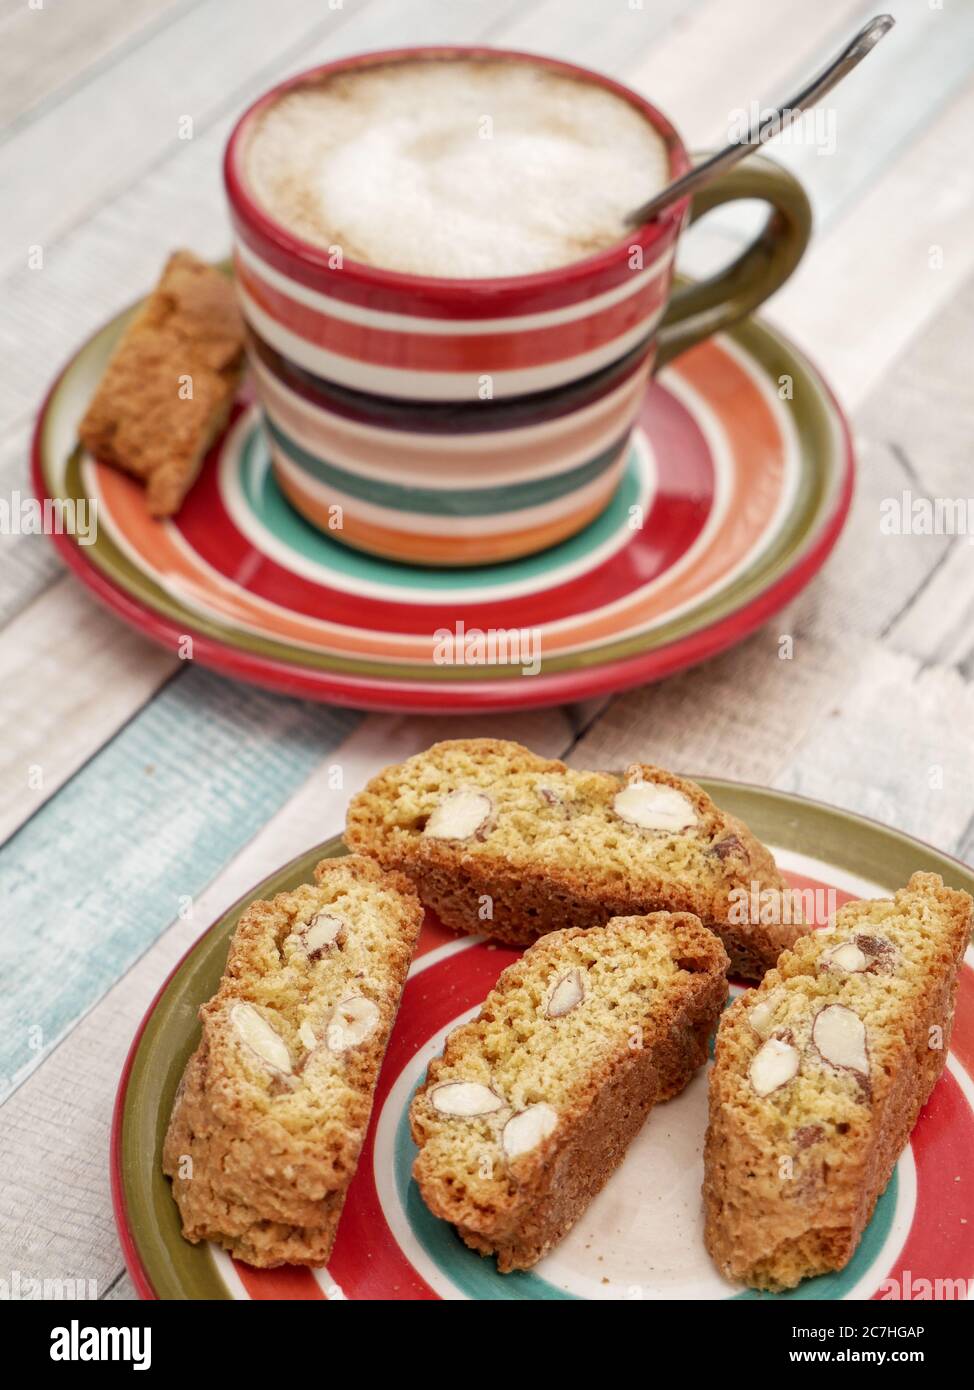 Cappuccino coffee with almond cookies cantucci. Stock Photo